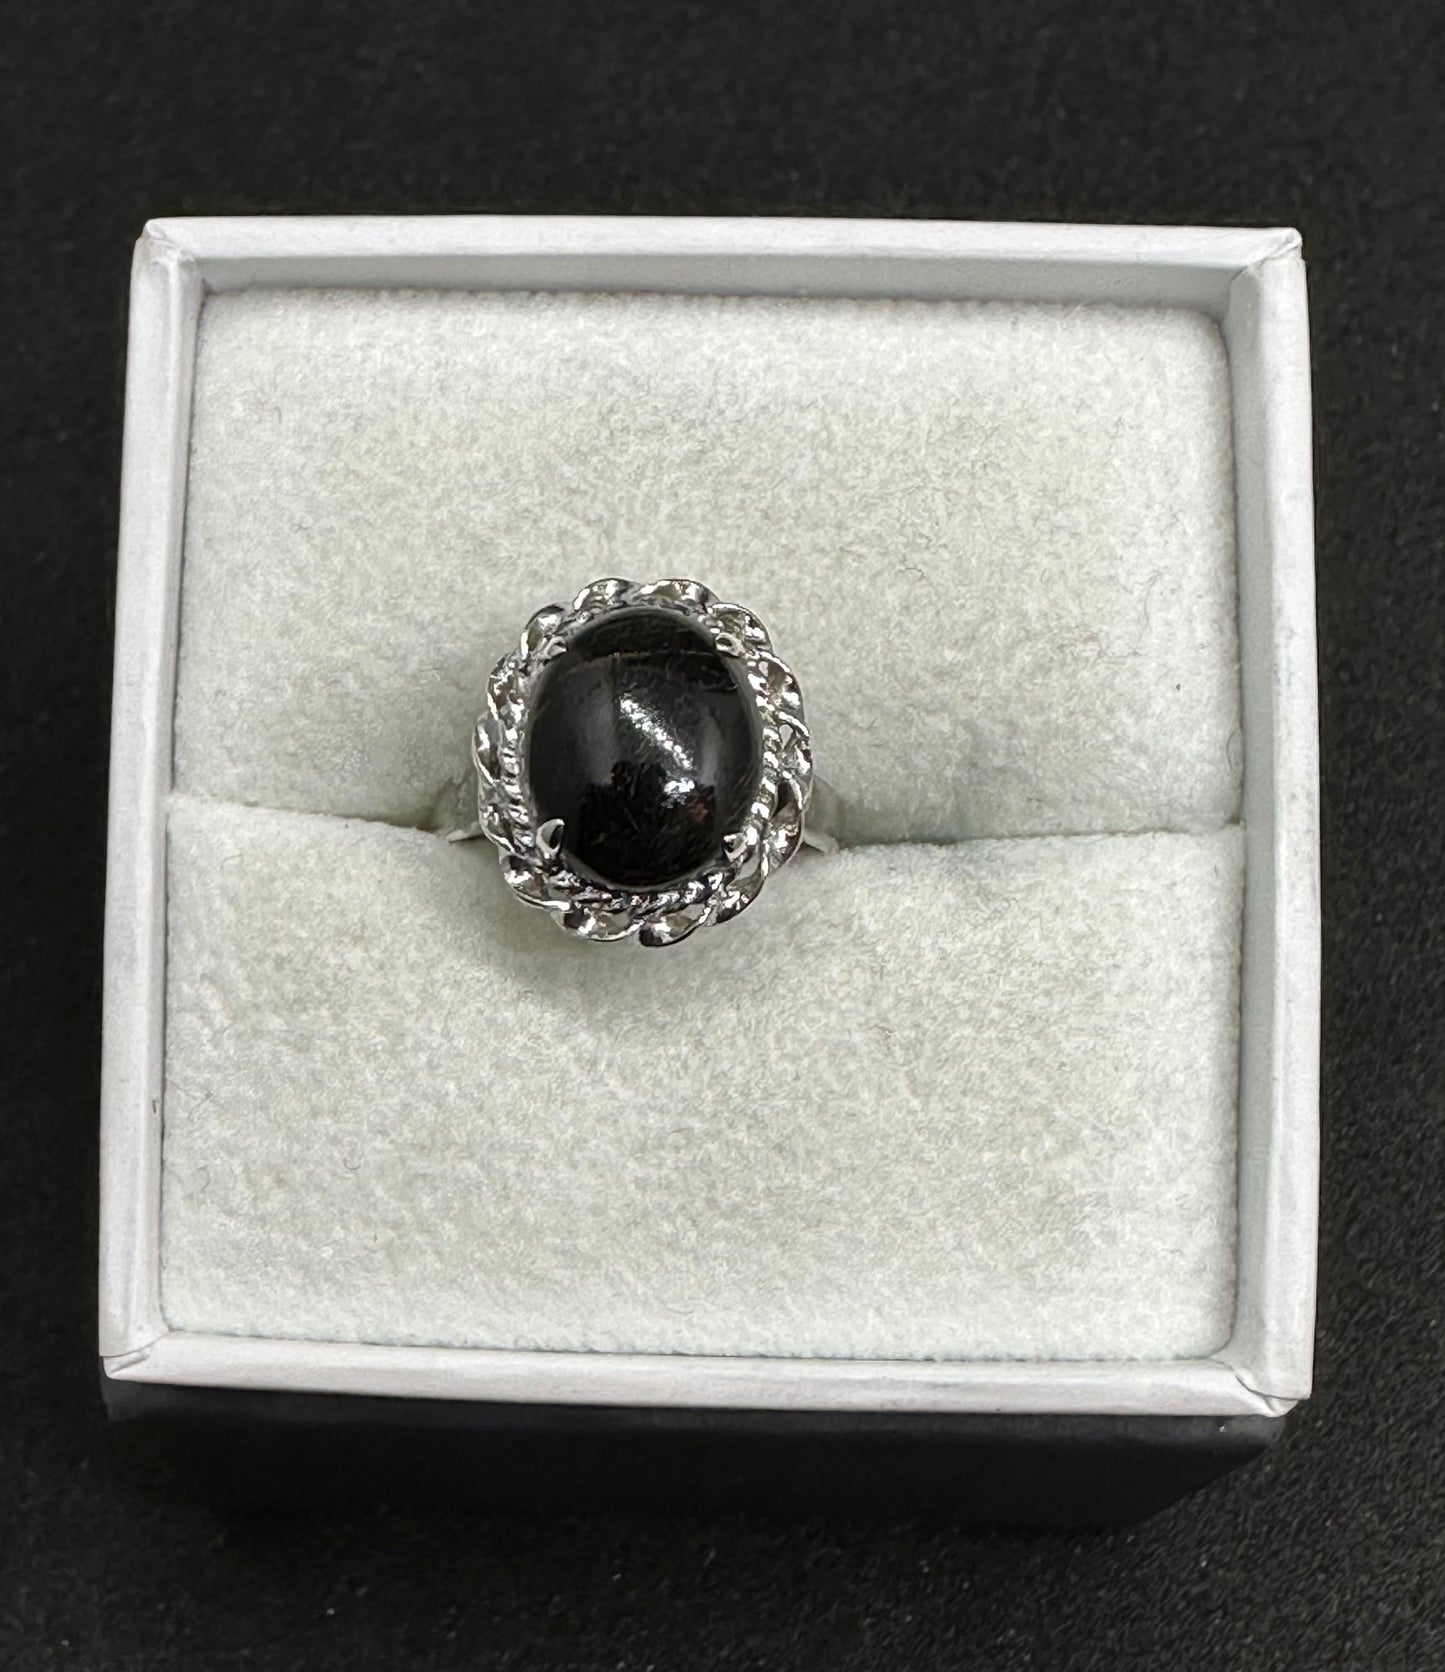 Vintage Art Deco Sterling Silver .925 Black Onyx Twisted Surround Ring Size 7.25